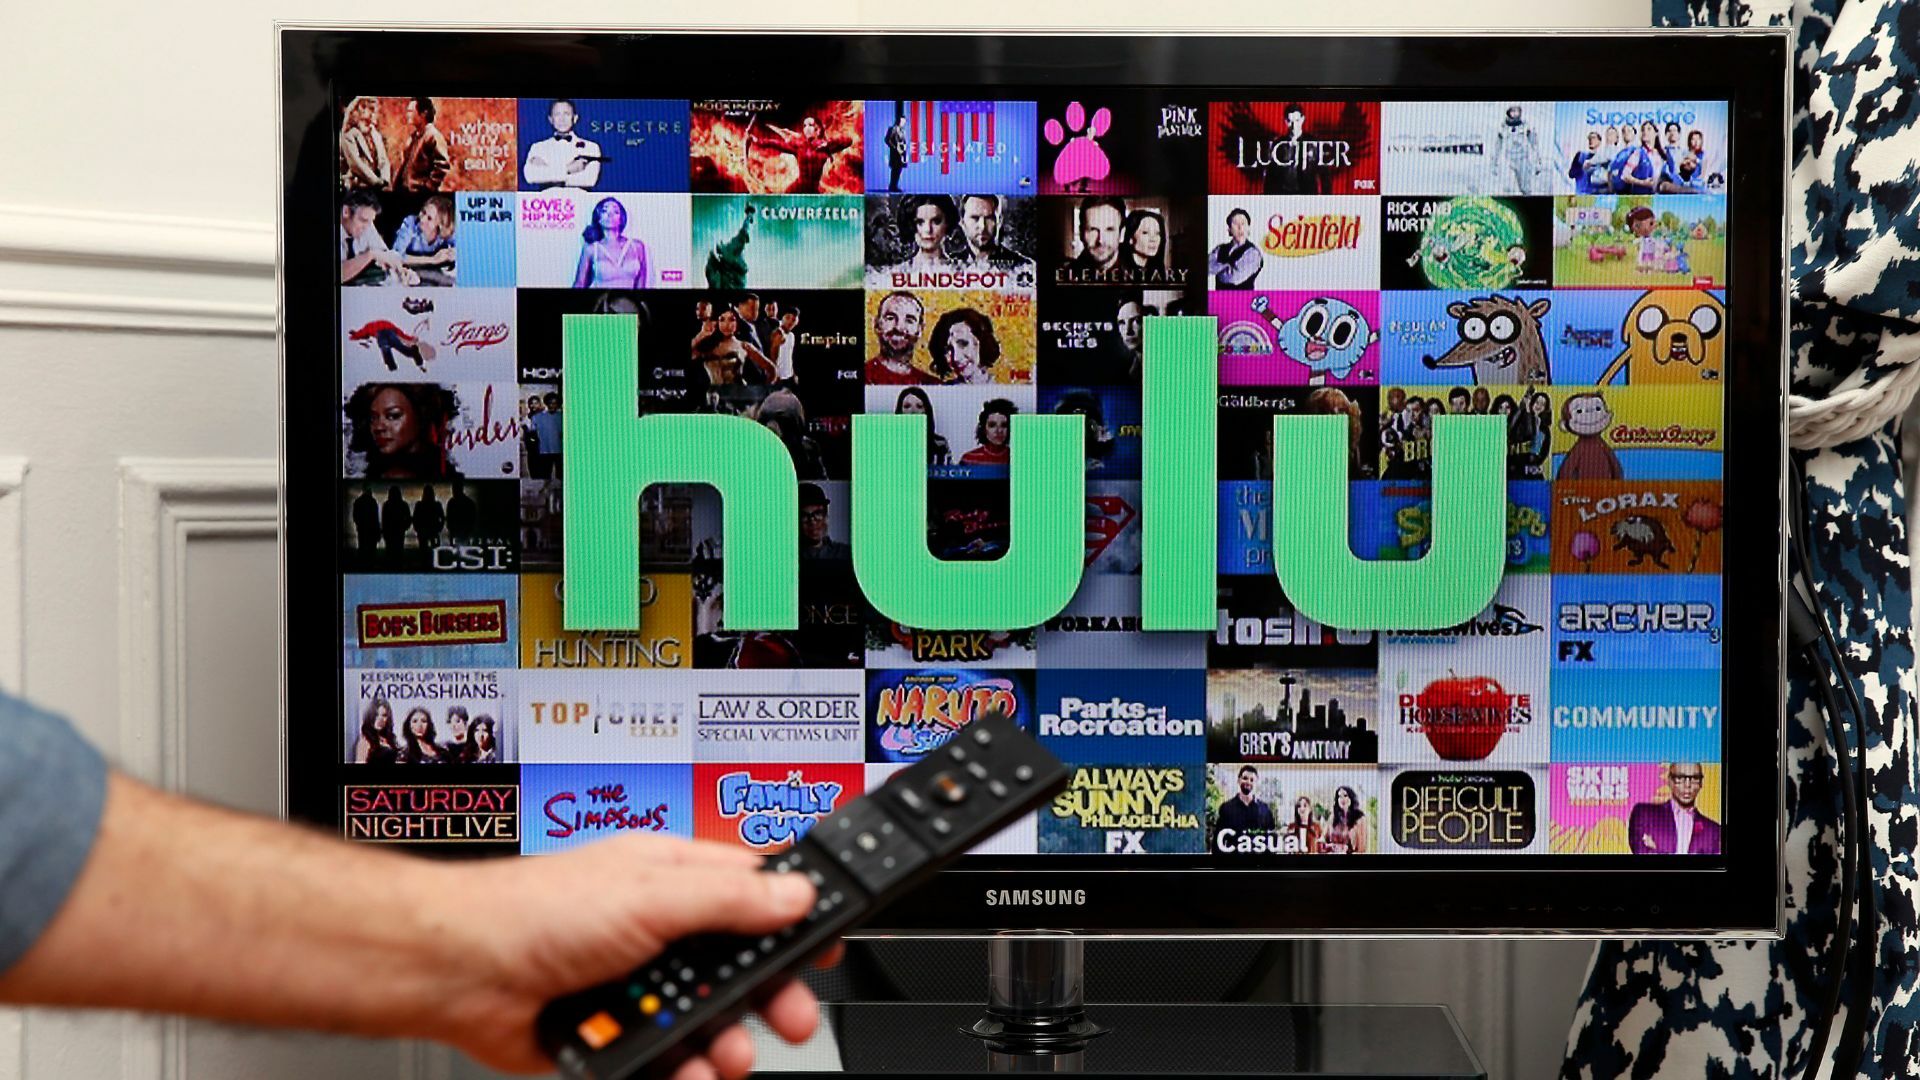 In this photo illustration, the Hulu media service provider's logo is displayed on the screen of a television.